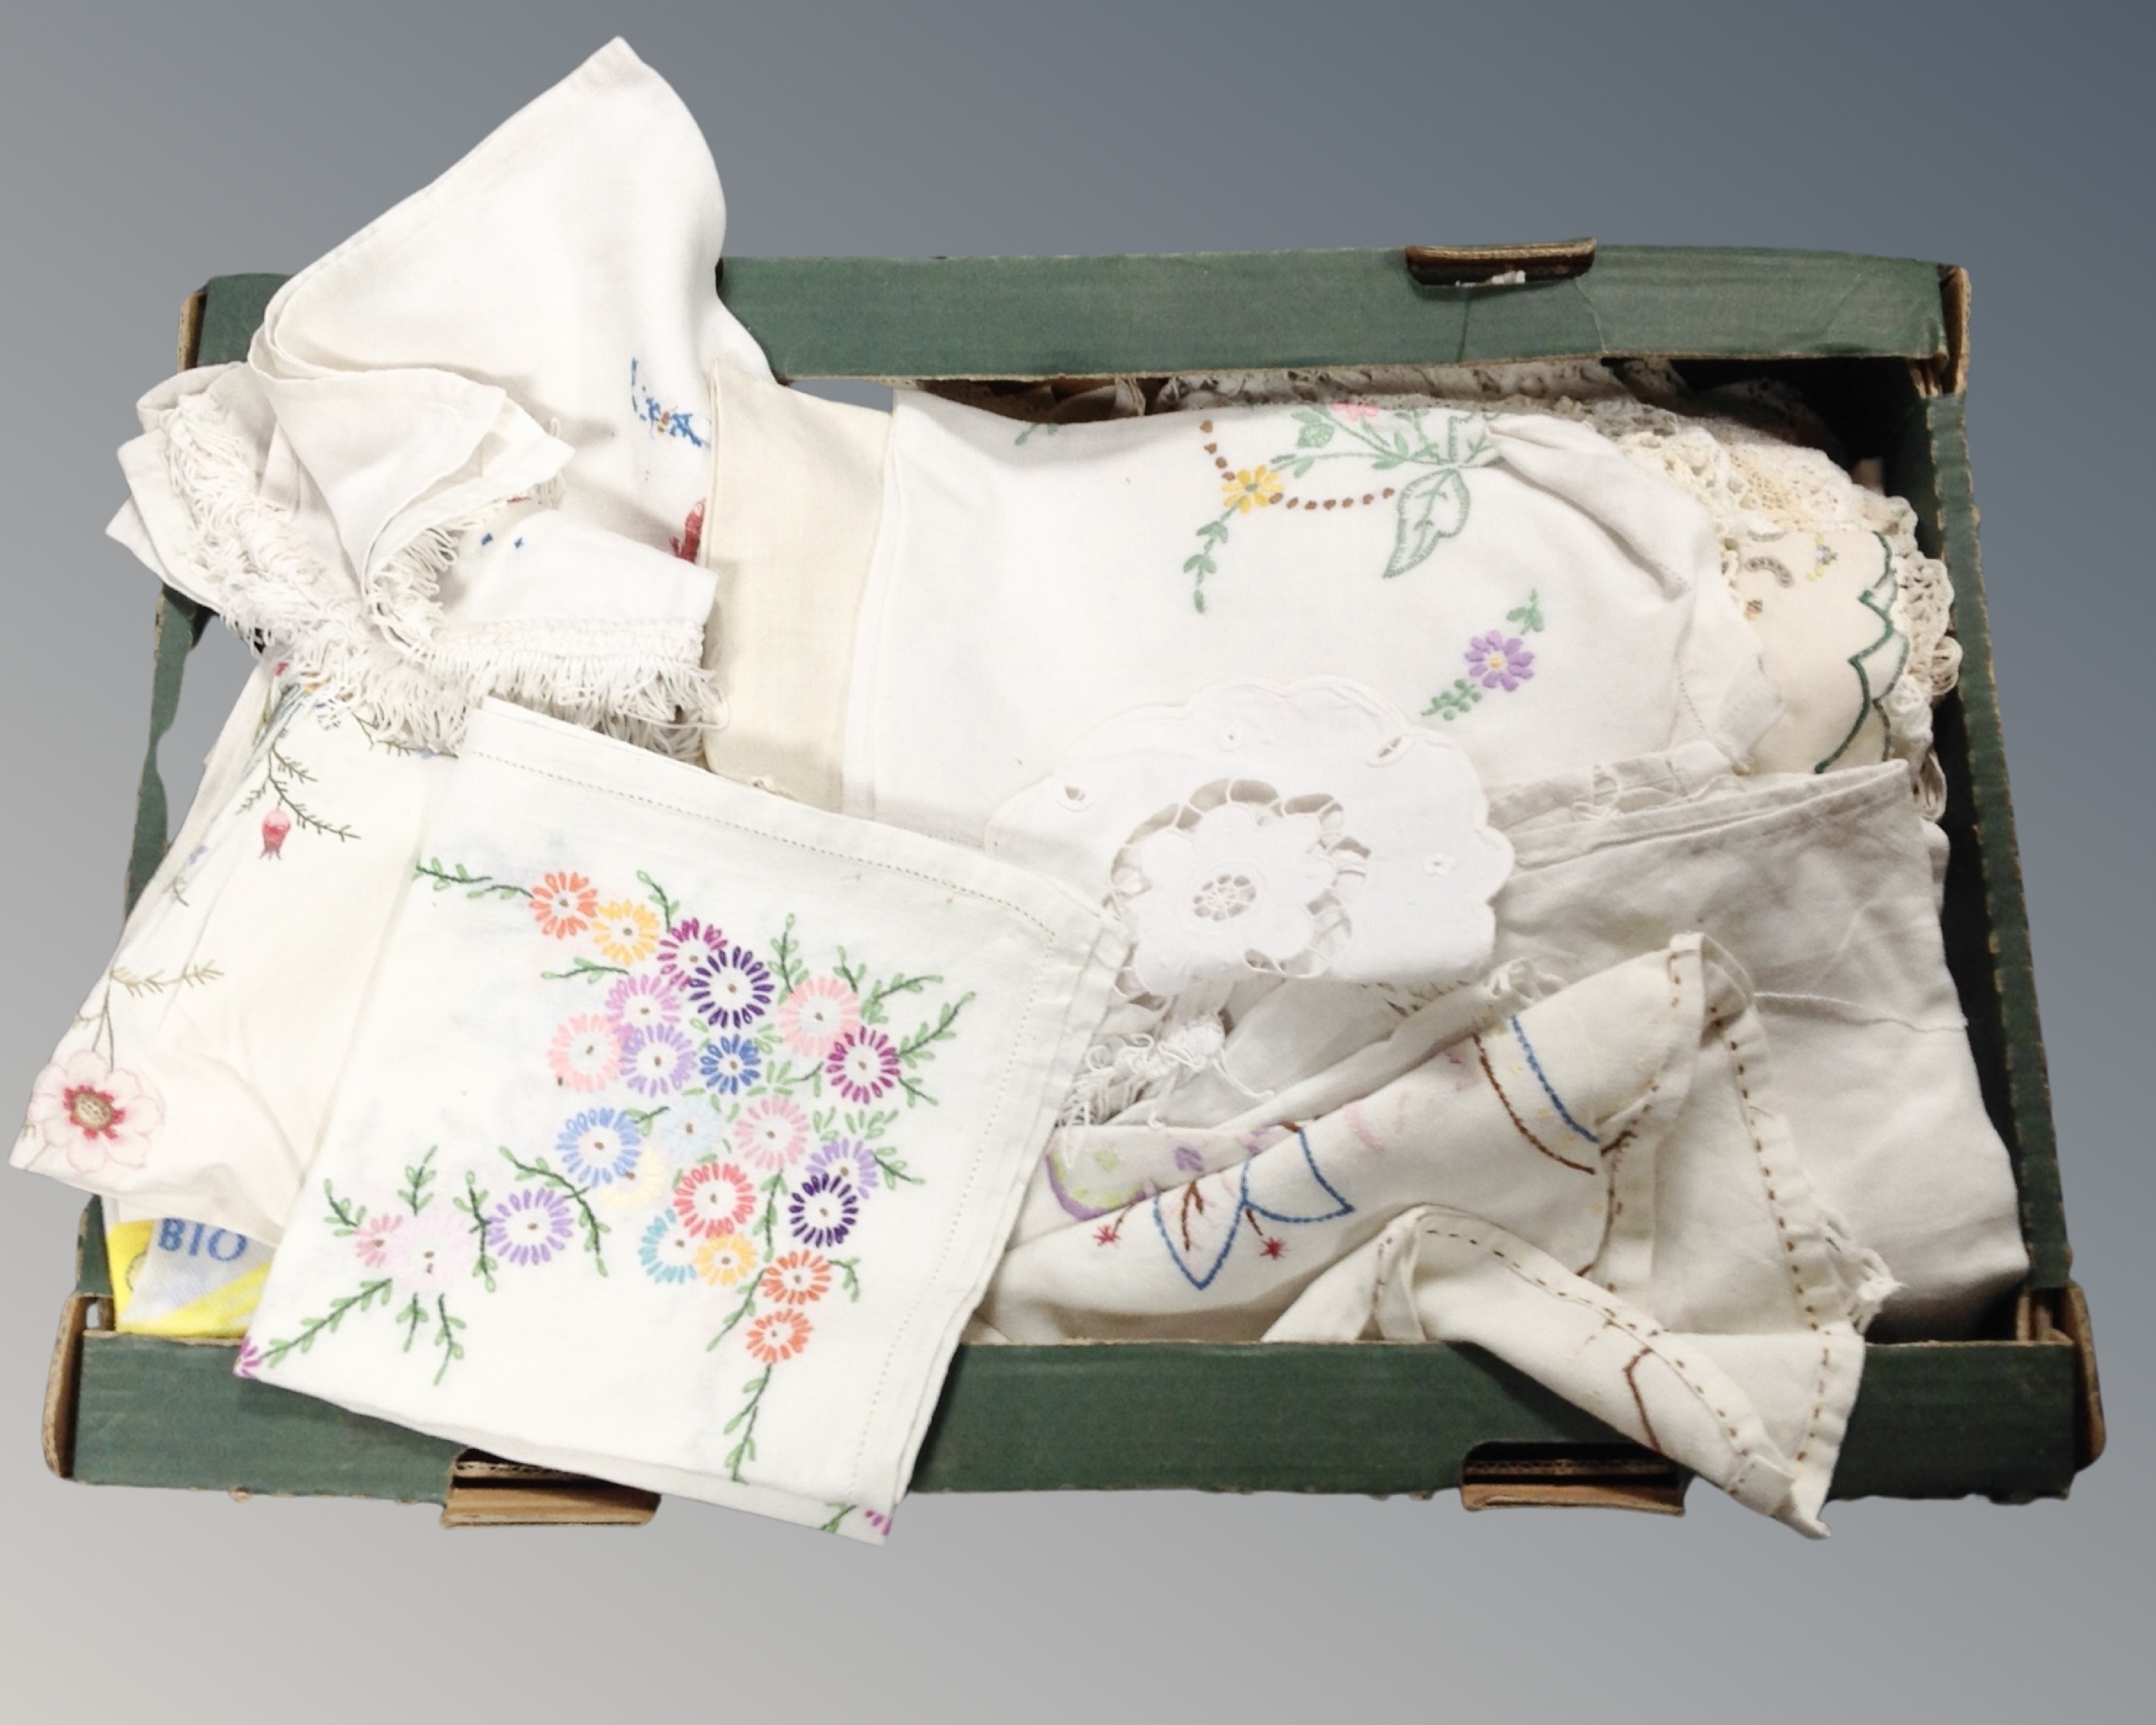 A box containing a quantity of assorted table linens including needlework examples.